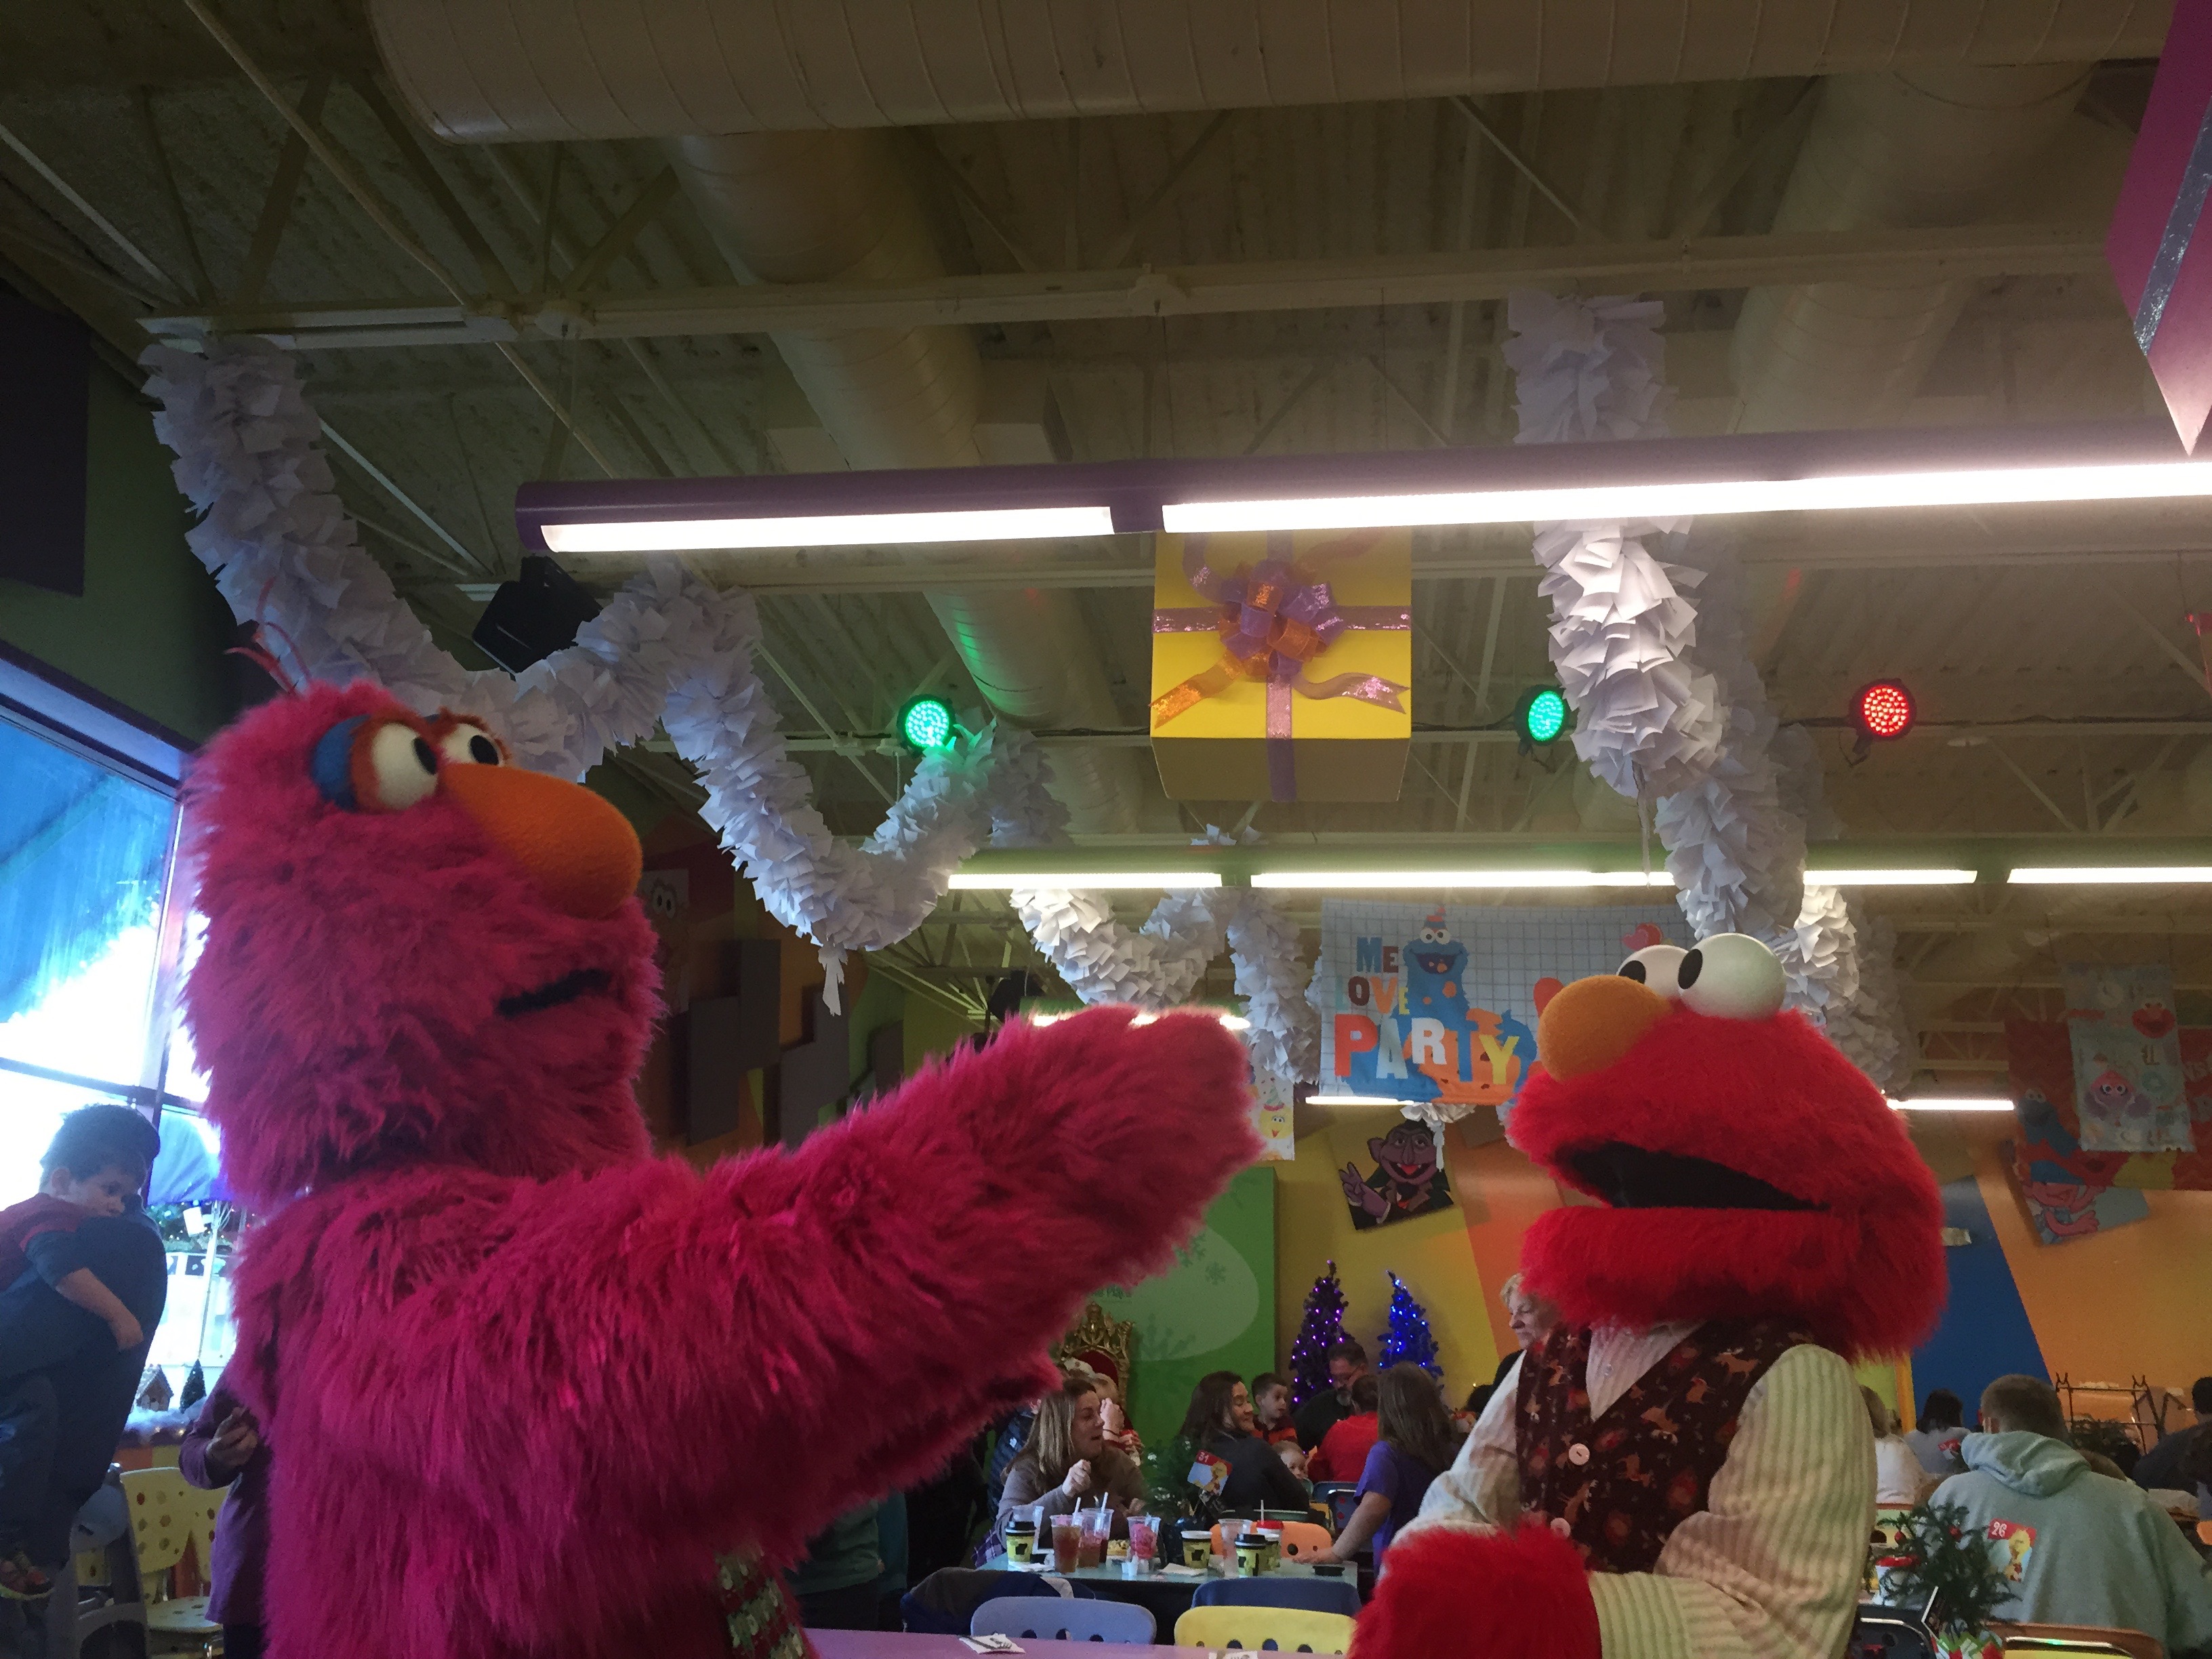 Dancing Telly Monster and Elmo at Sesame Place